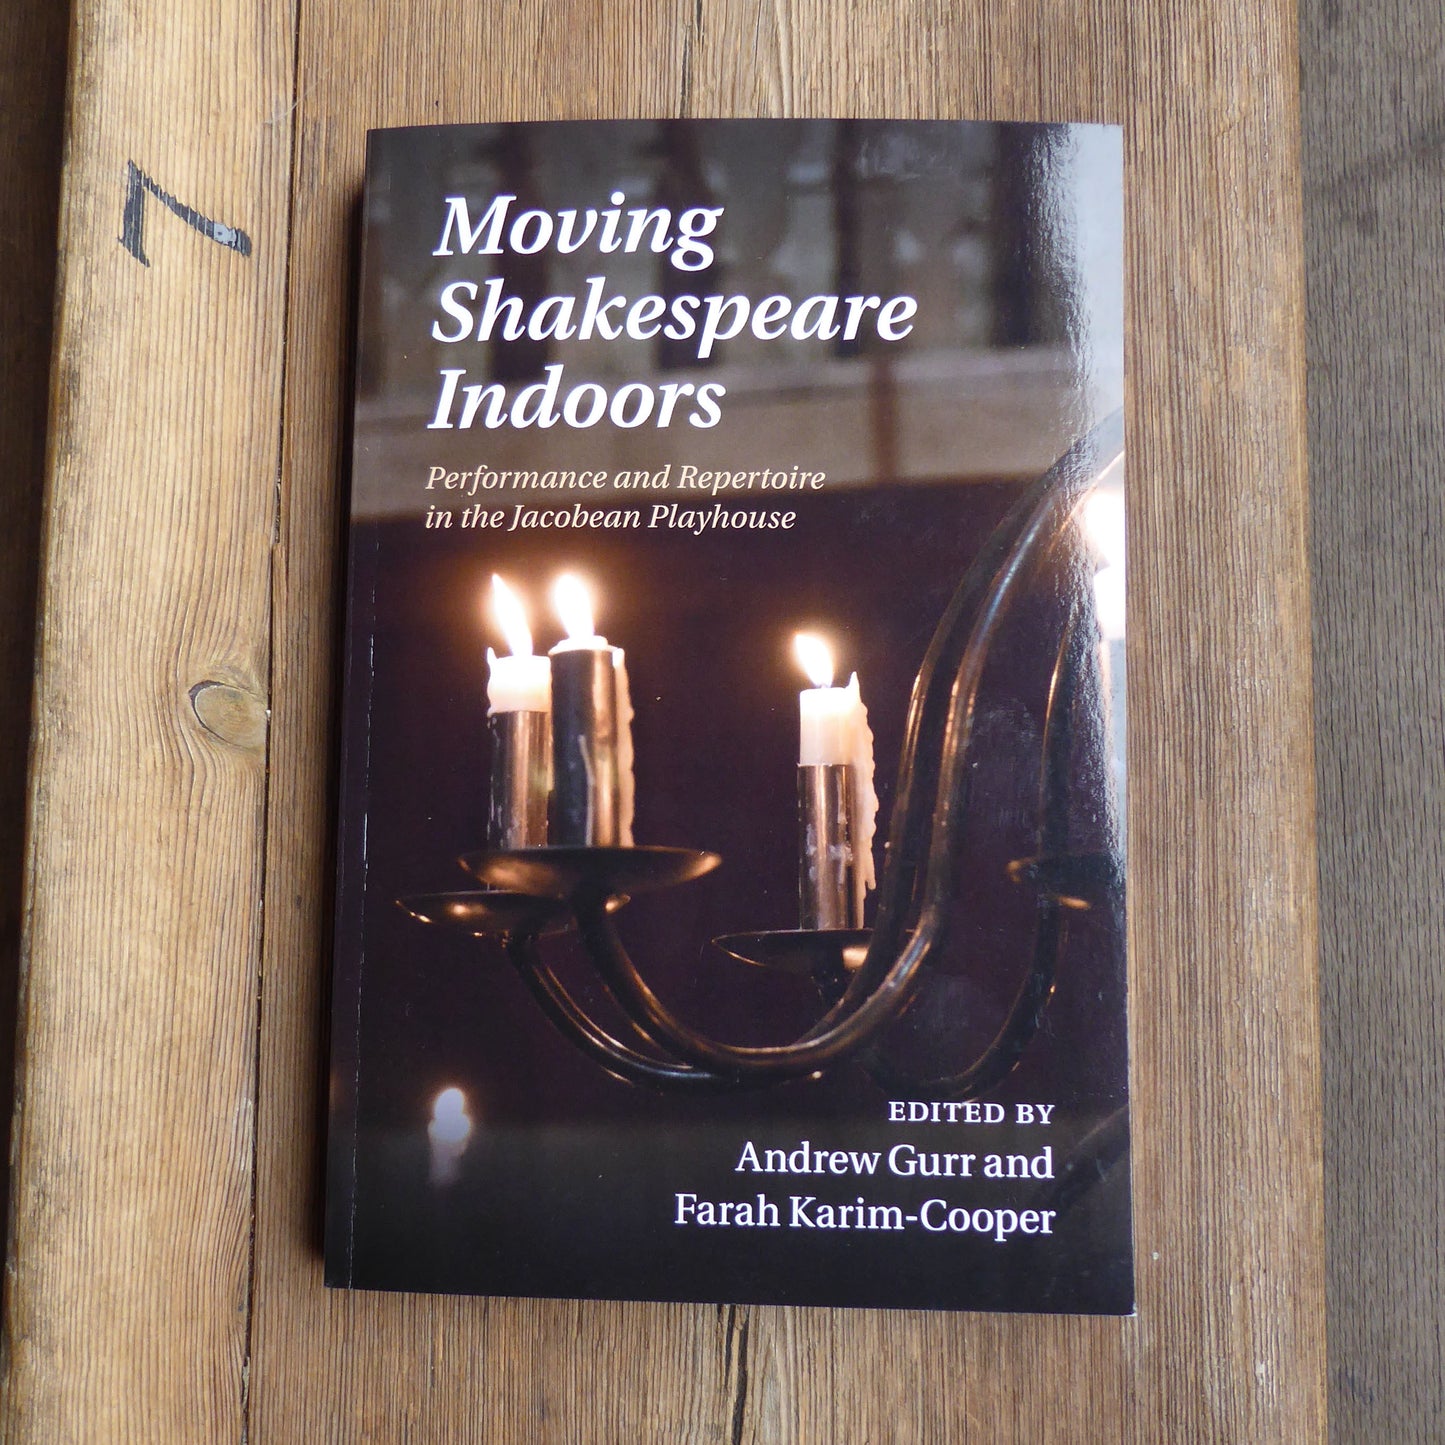 a copy of Moving Shakespeare Indoors Edited by Andrew Gurr and Farah Karim-Cooper